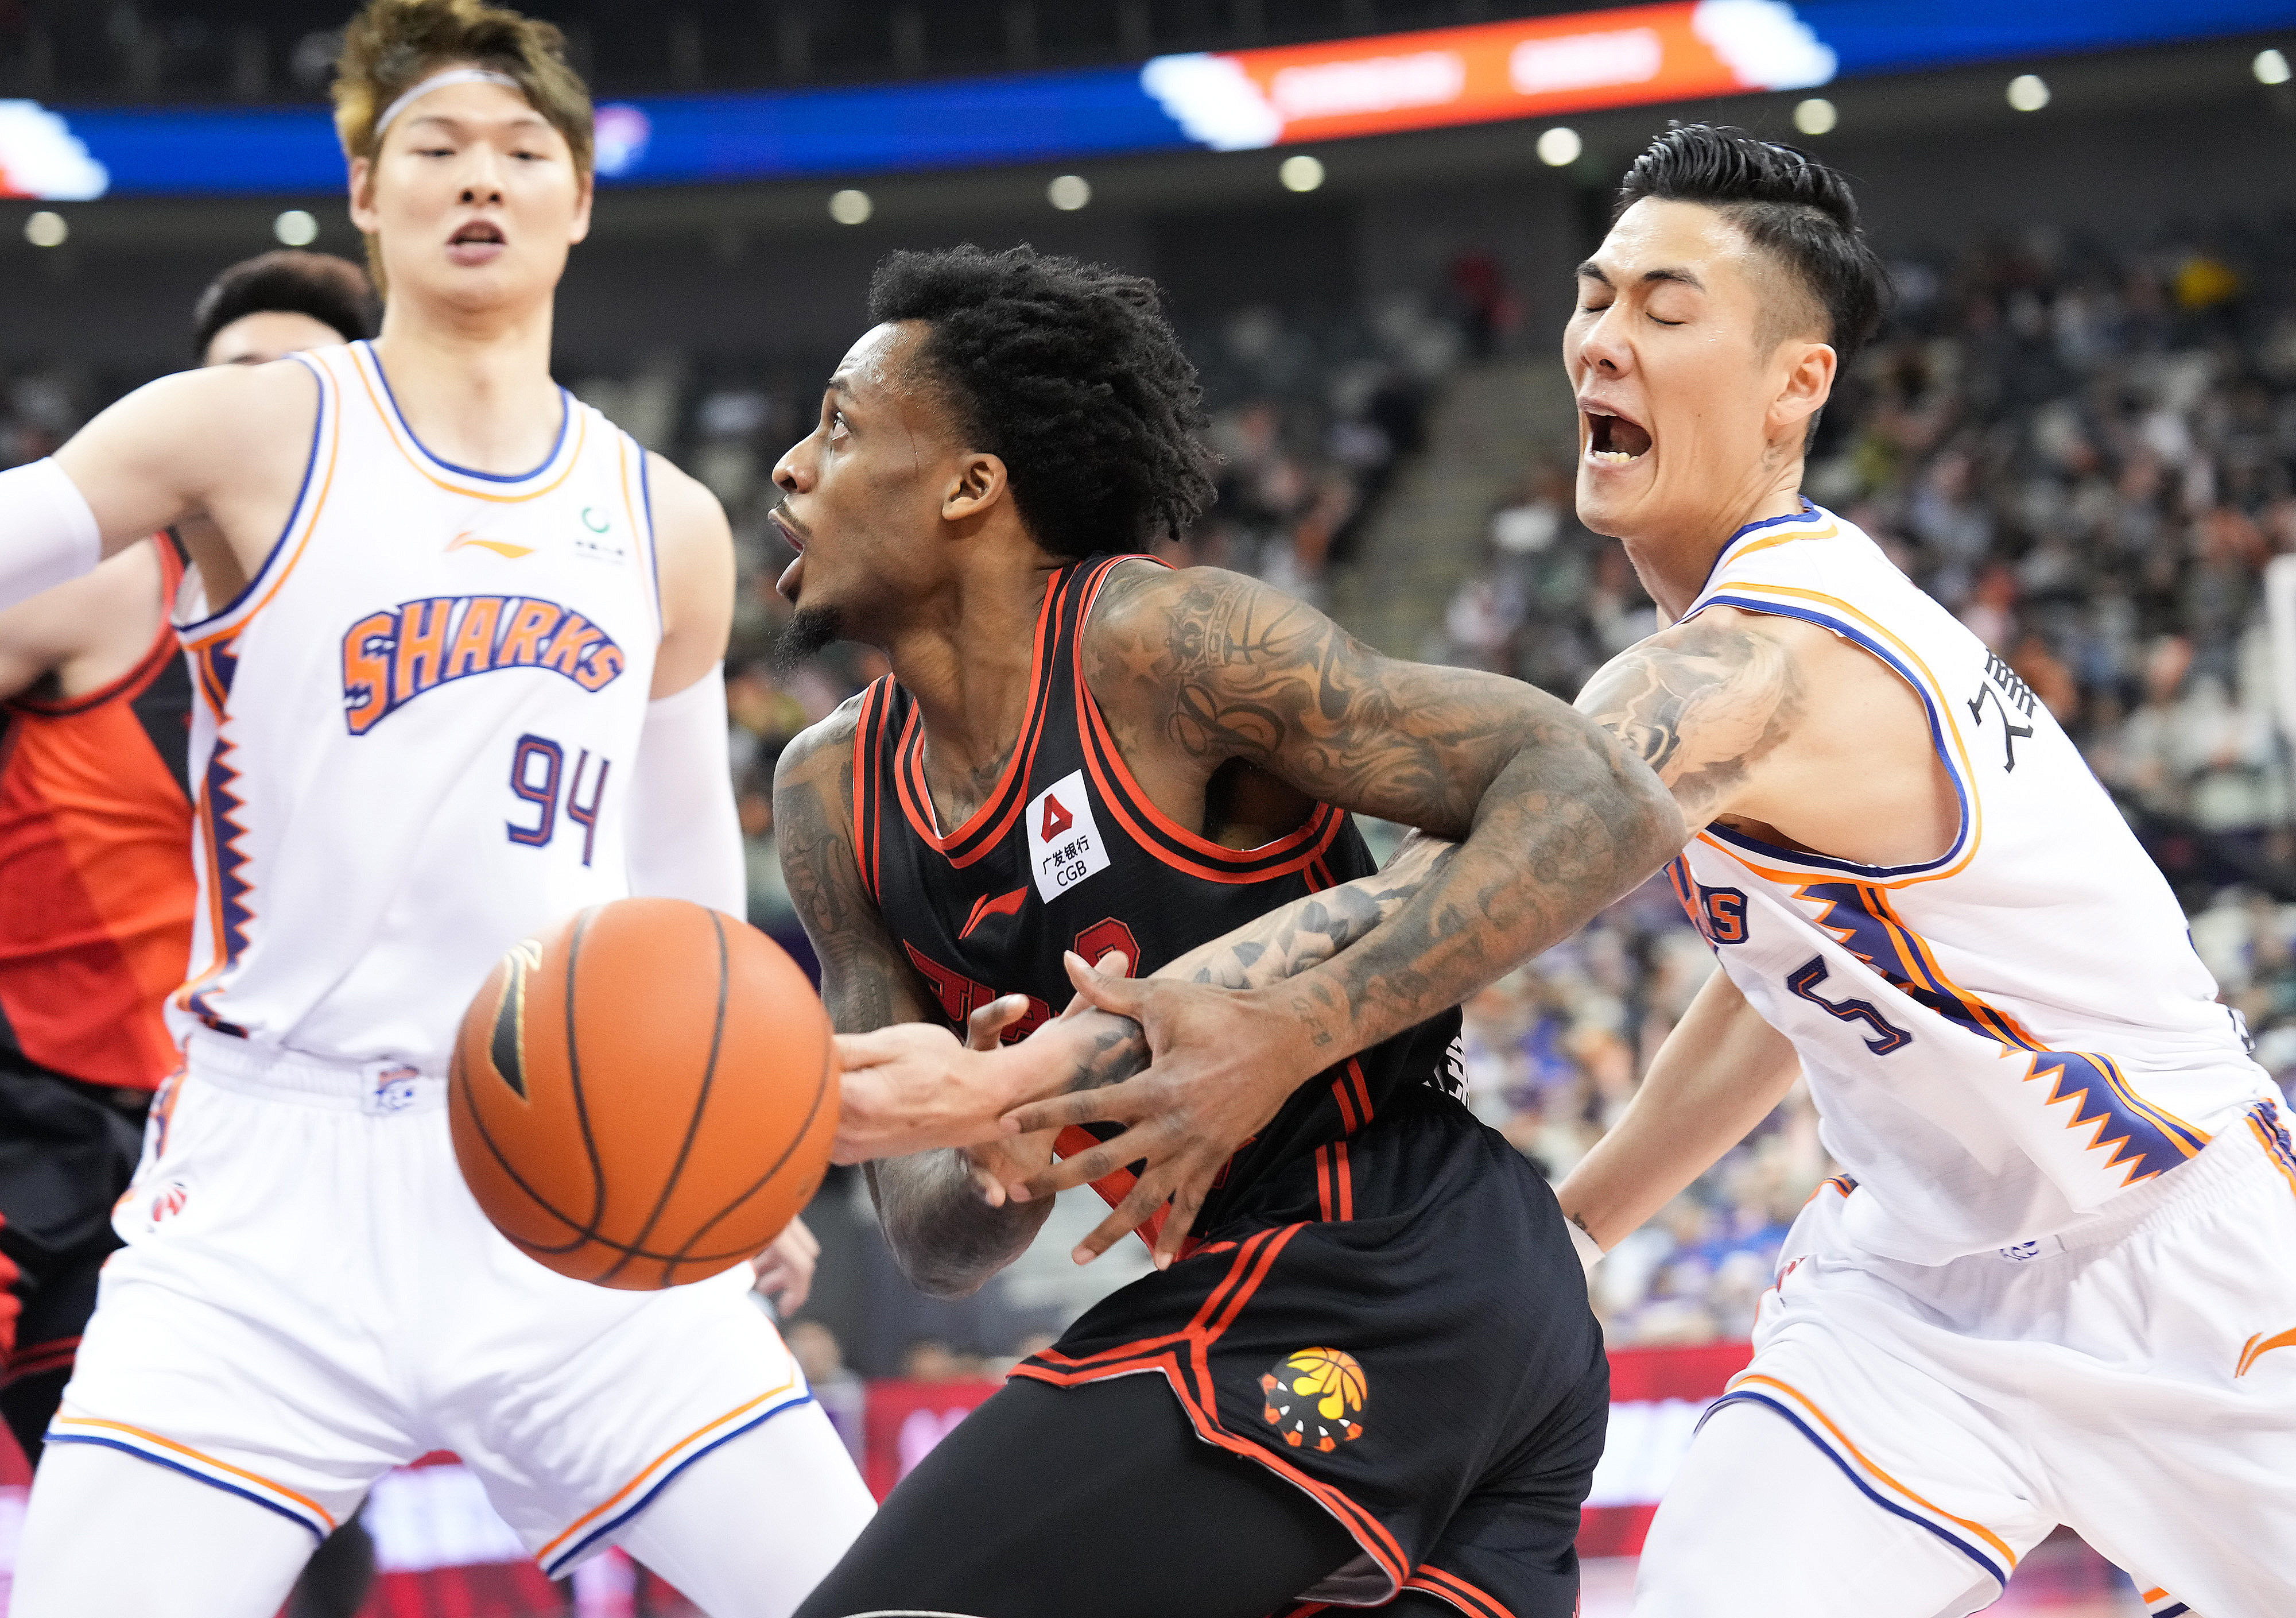 Era of the Sharks? 'Knicks' of the CBA, Shanghai Sharks title aspirations., by ChairmanBall